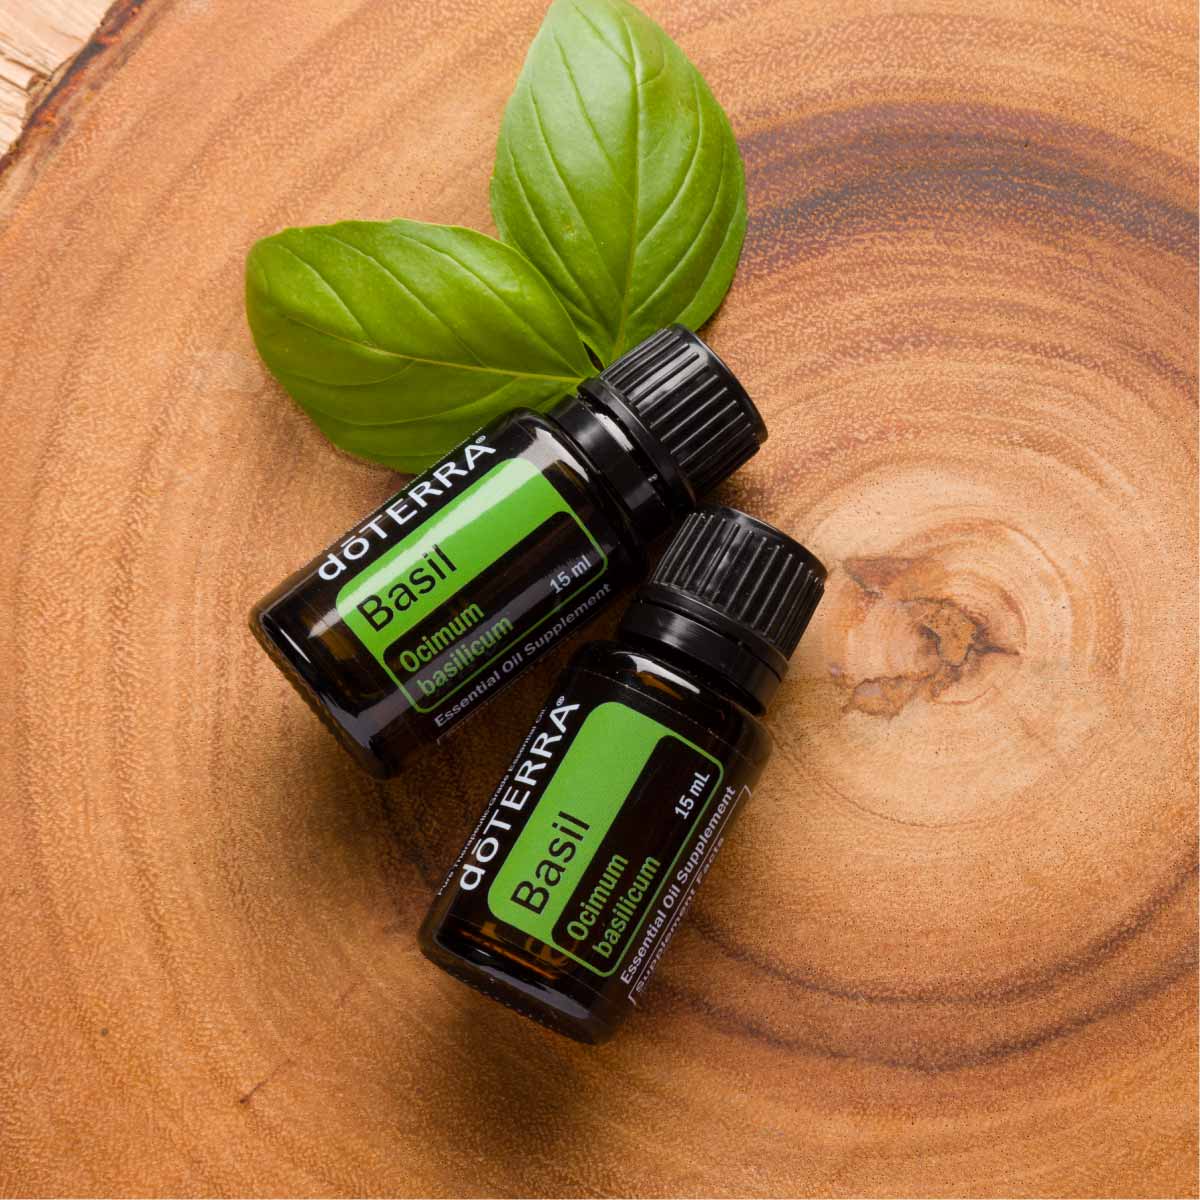 What are the benefits of Basil essential oil? Basil oil promotes focus, soothes skin, reduces anxious feelings, and adds flavor when cooking.